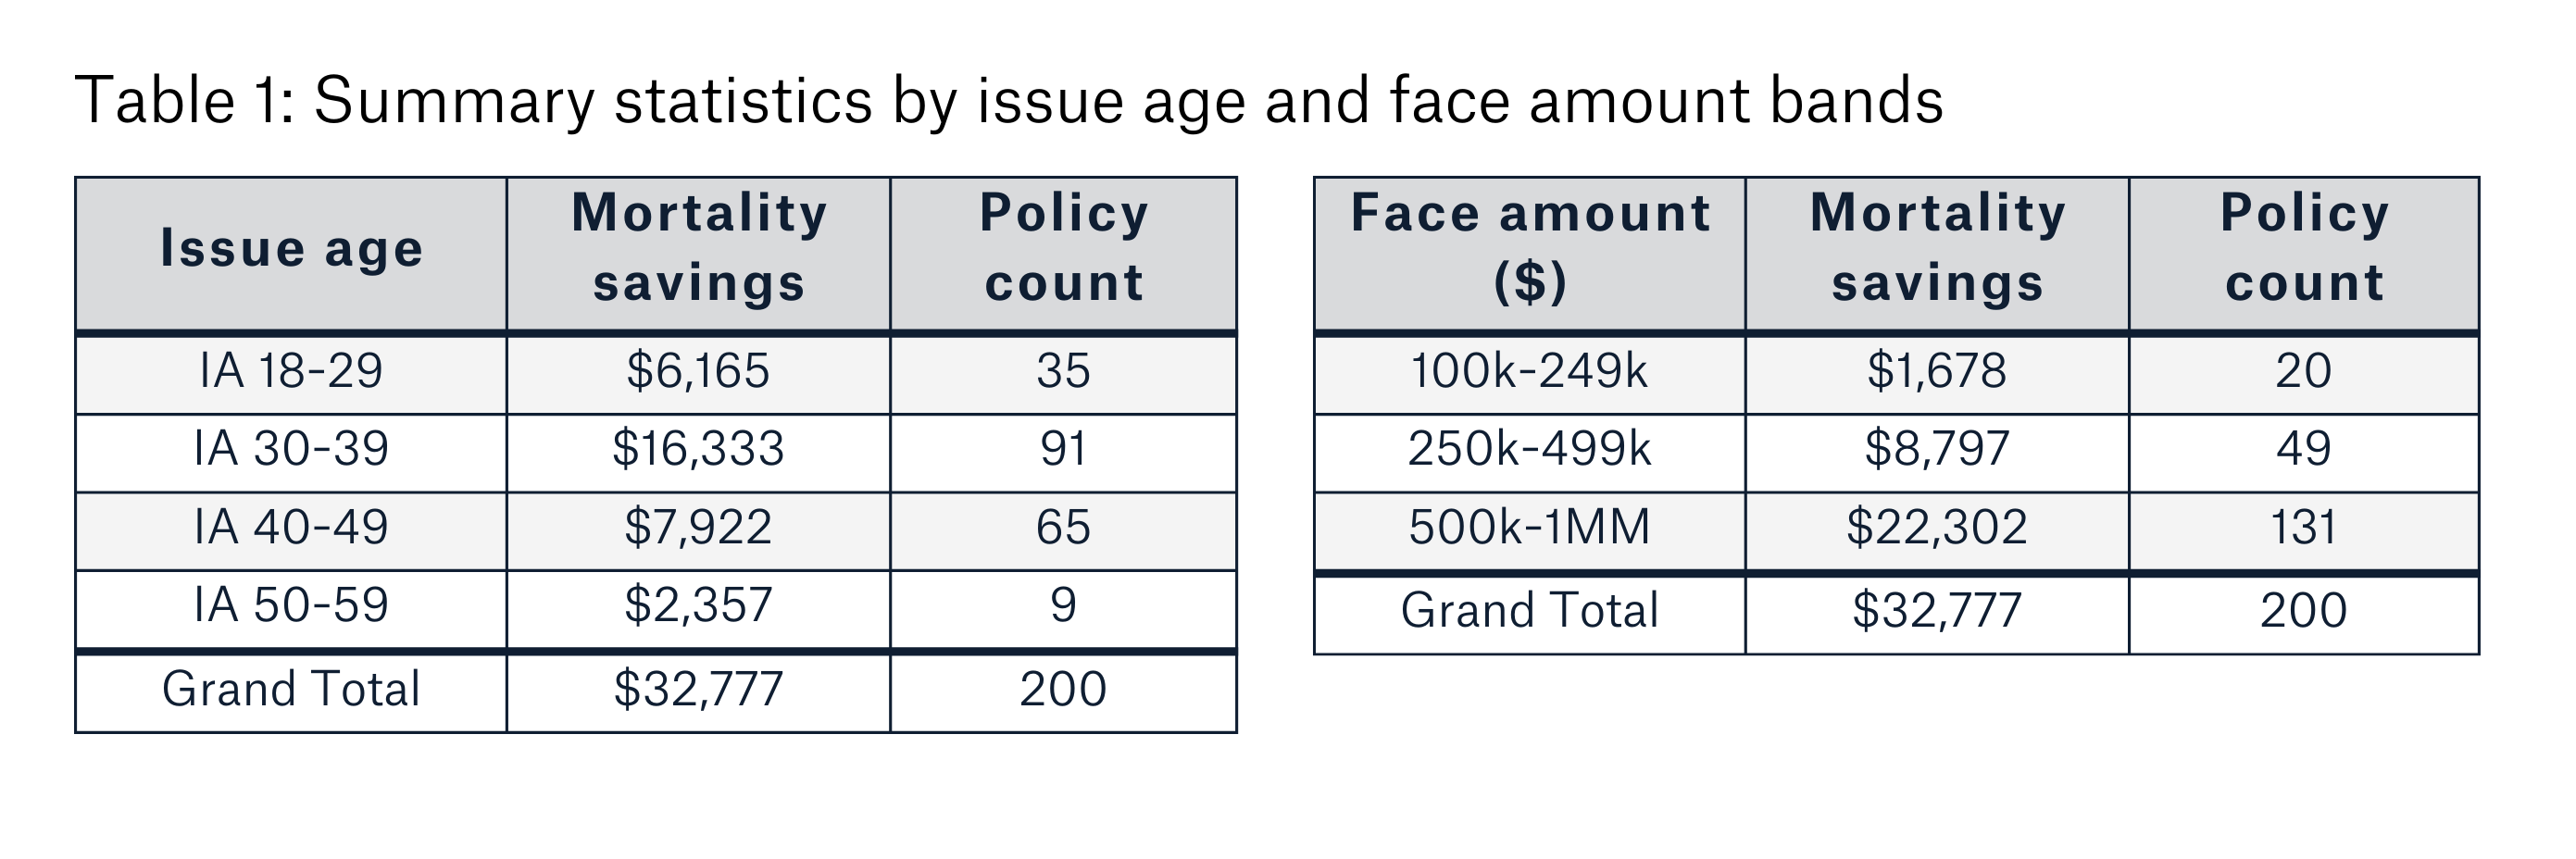 Table 1: Summary statistics by issue age and face amount bands